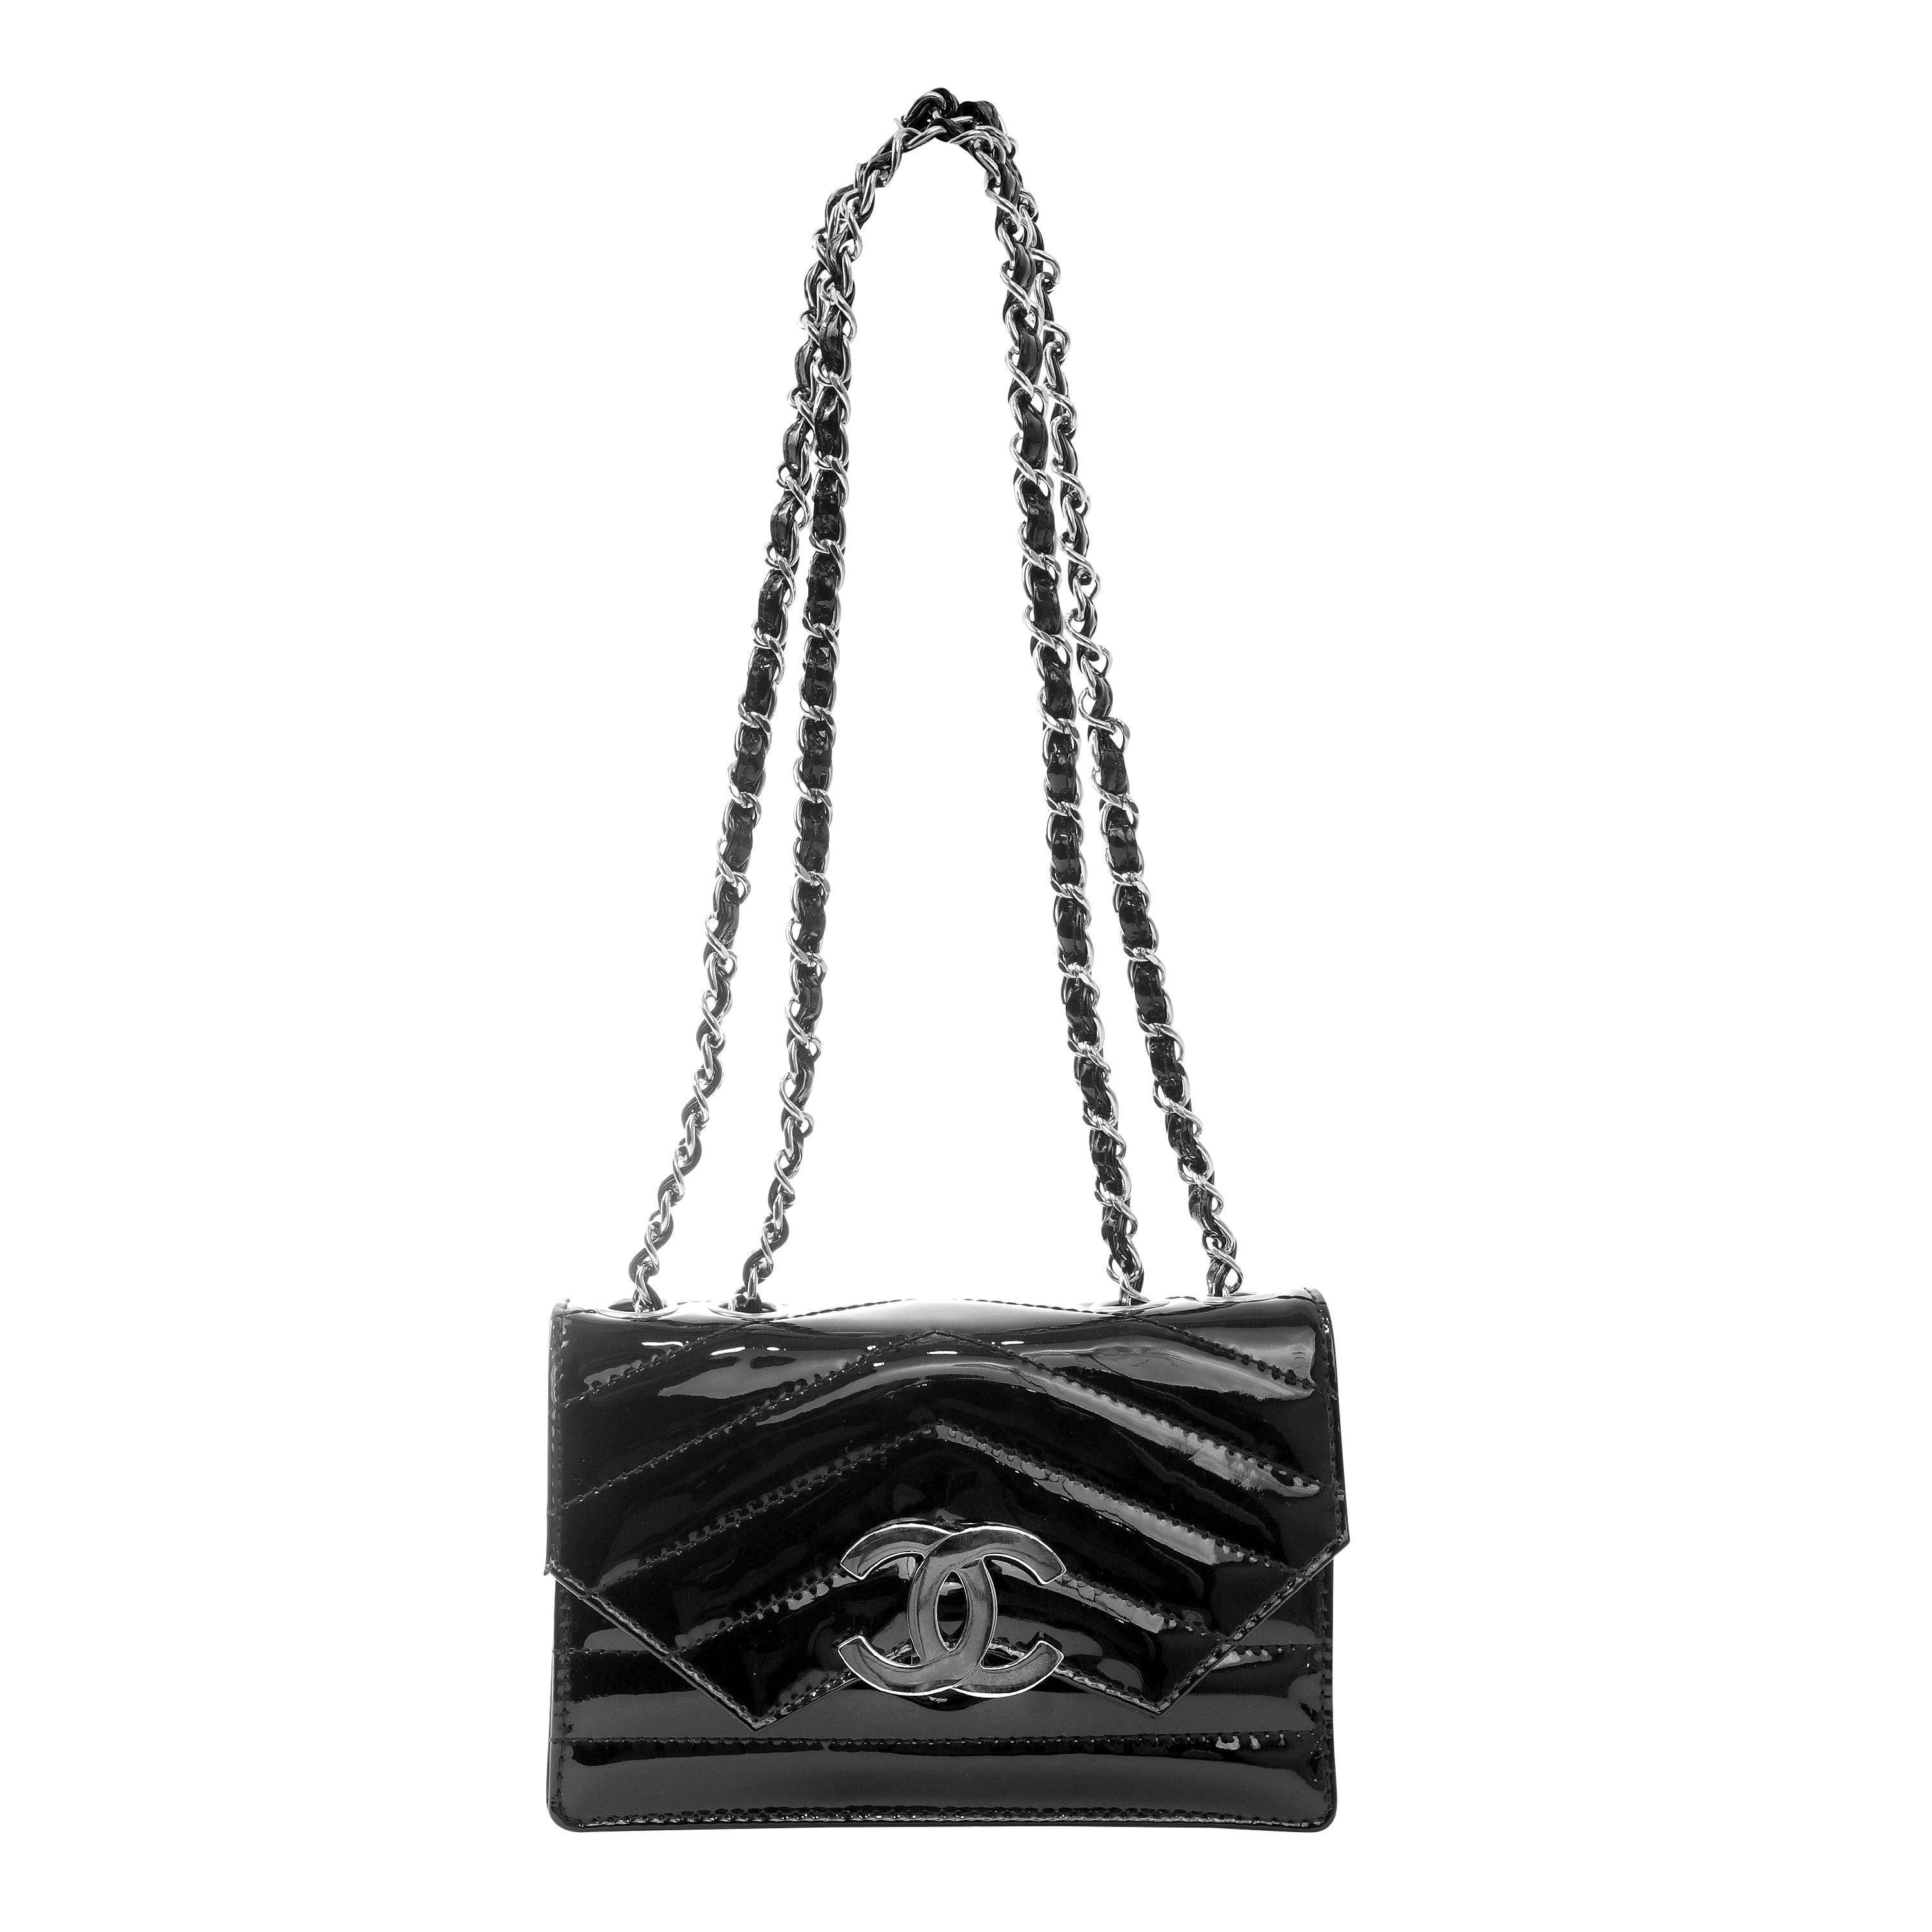 Chanel Black Patent Leather Chevron Mini CC Crossbody with Silver Hardware In Excellent Condition For Sale In Palm Beach, FL